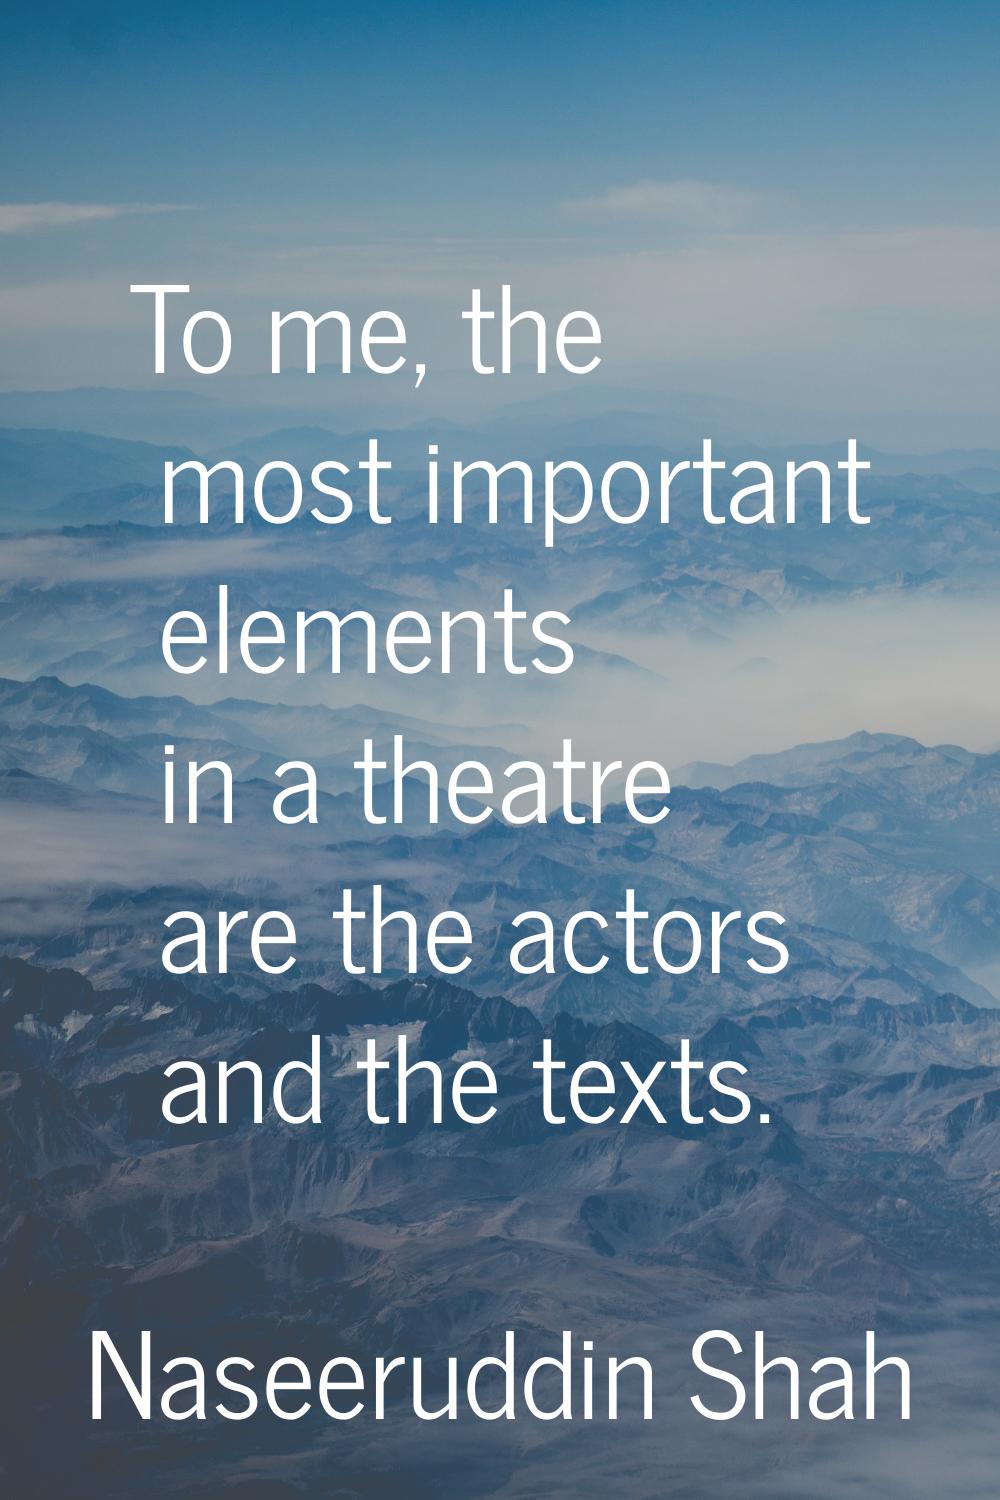 To me, the most important elements in a theatre are the actors and the texts.